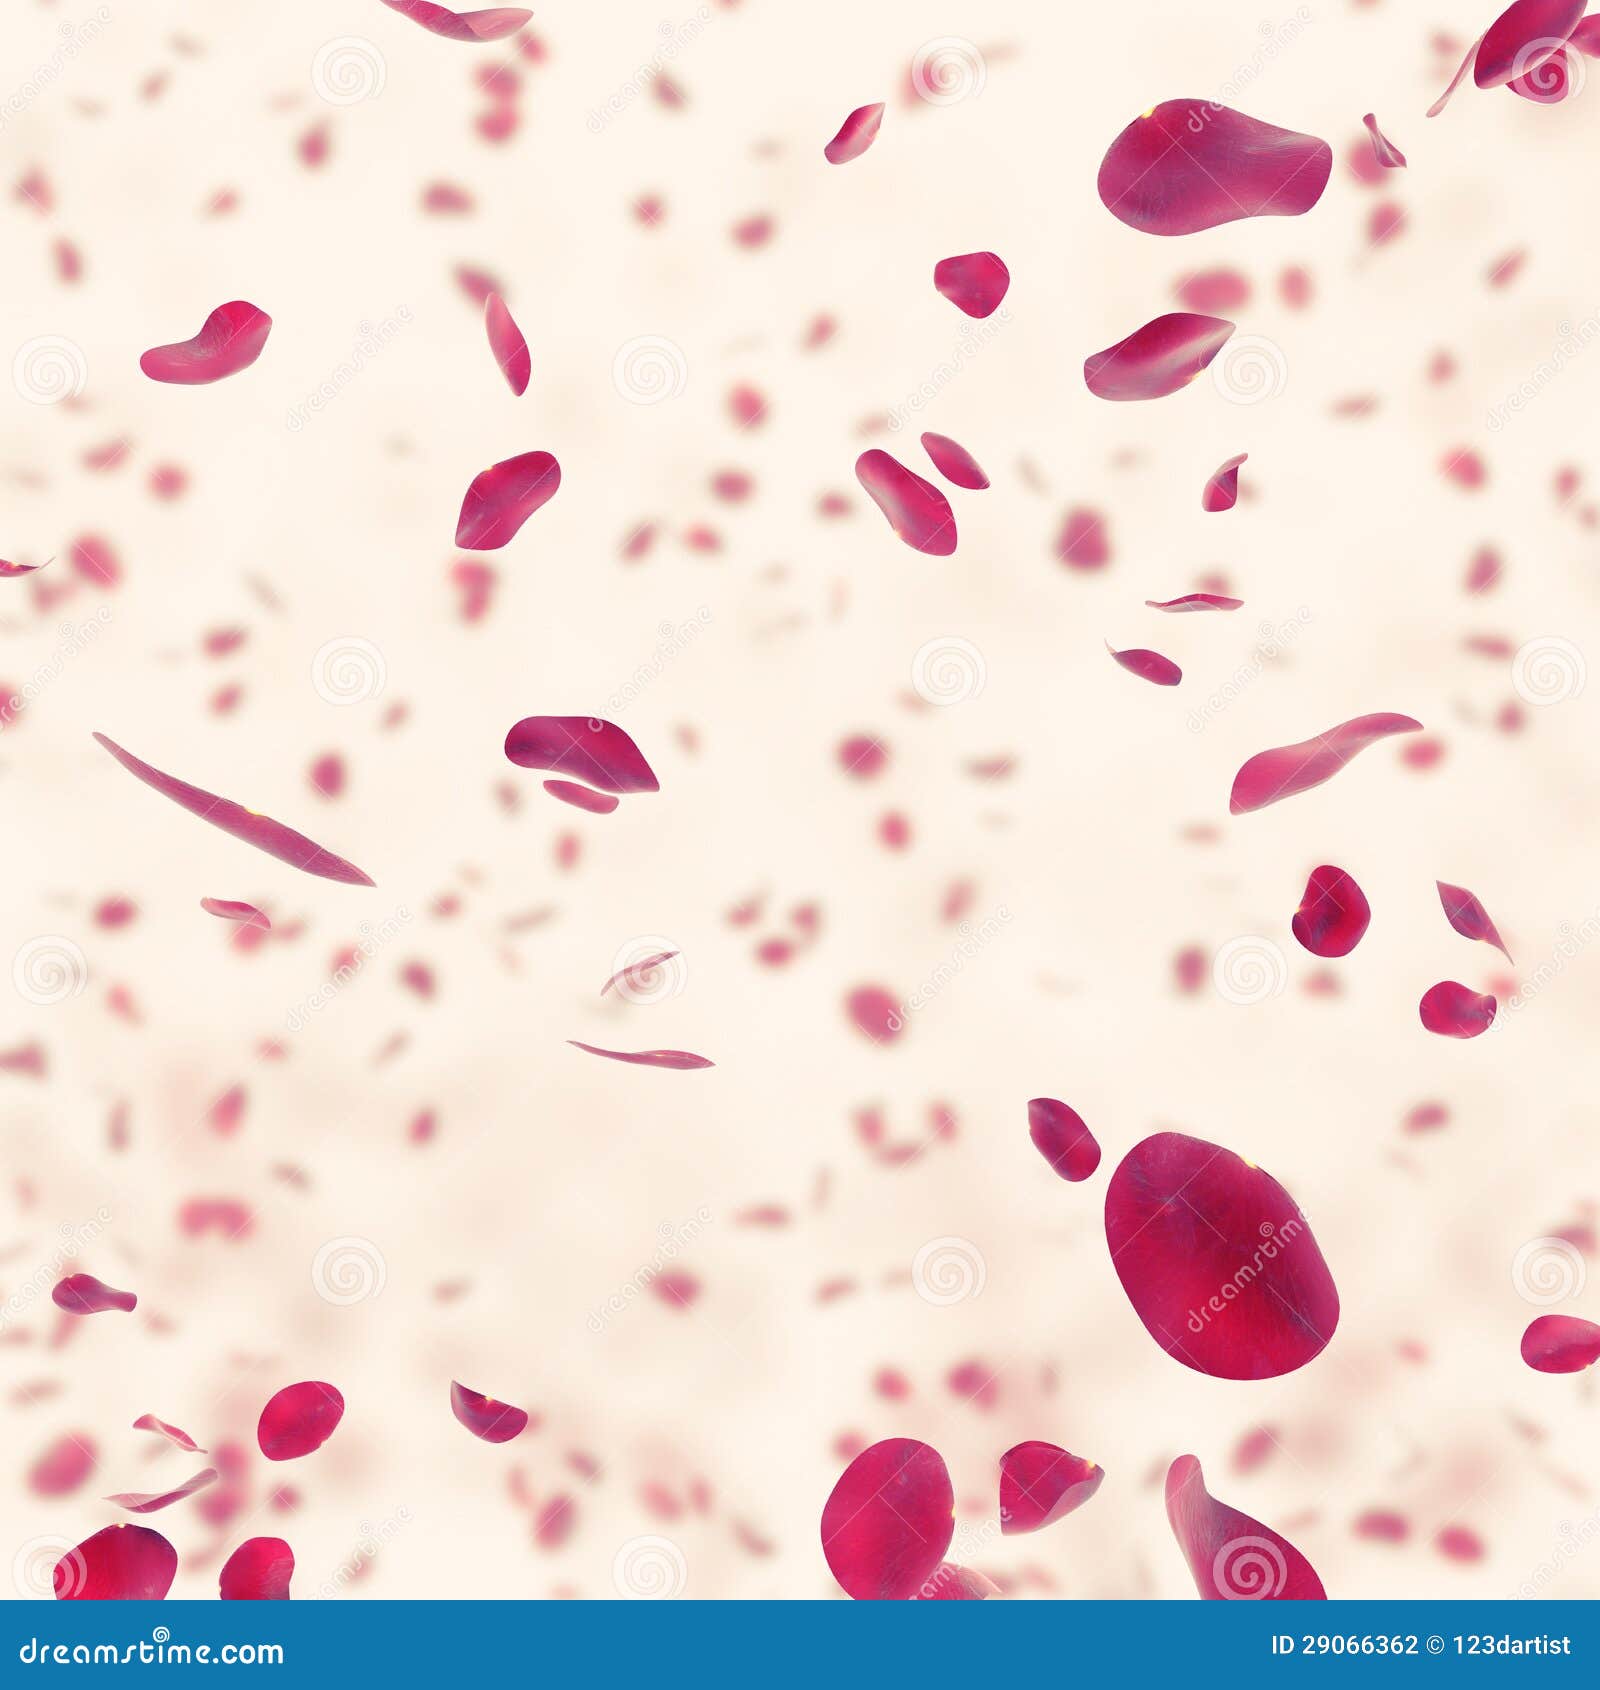 Falling Rose Petals Retro Background Stock Photo - Image of background,  particles: 29066362